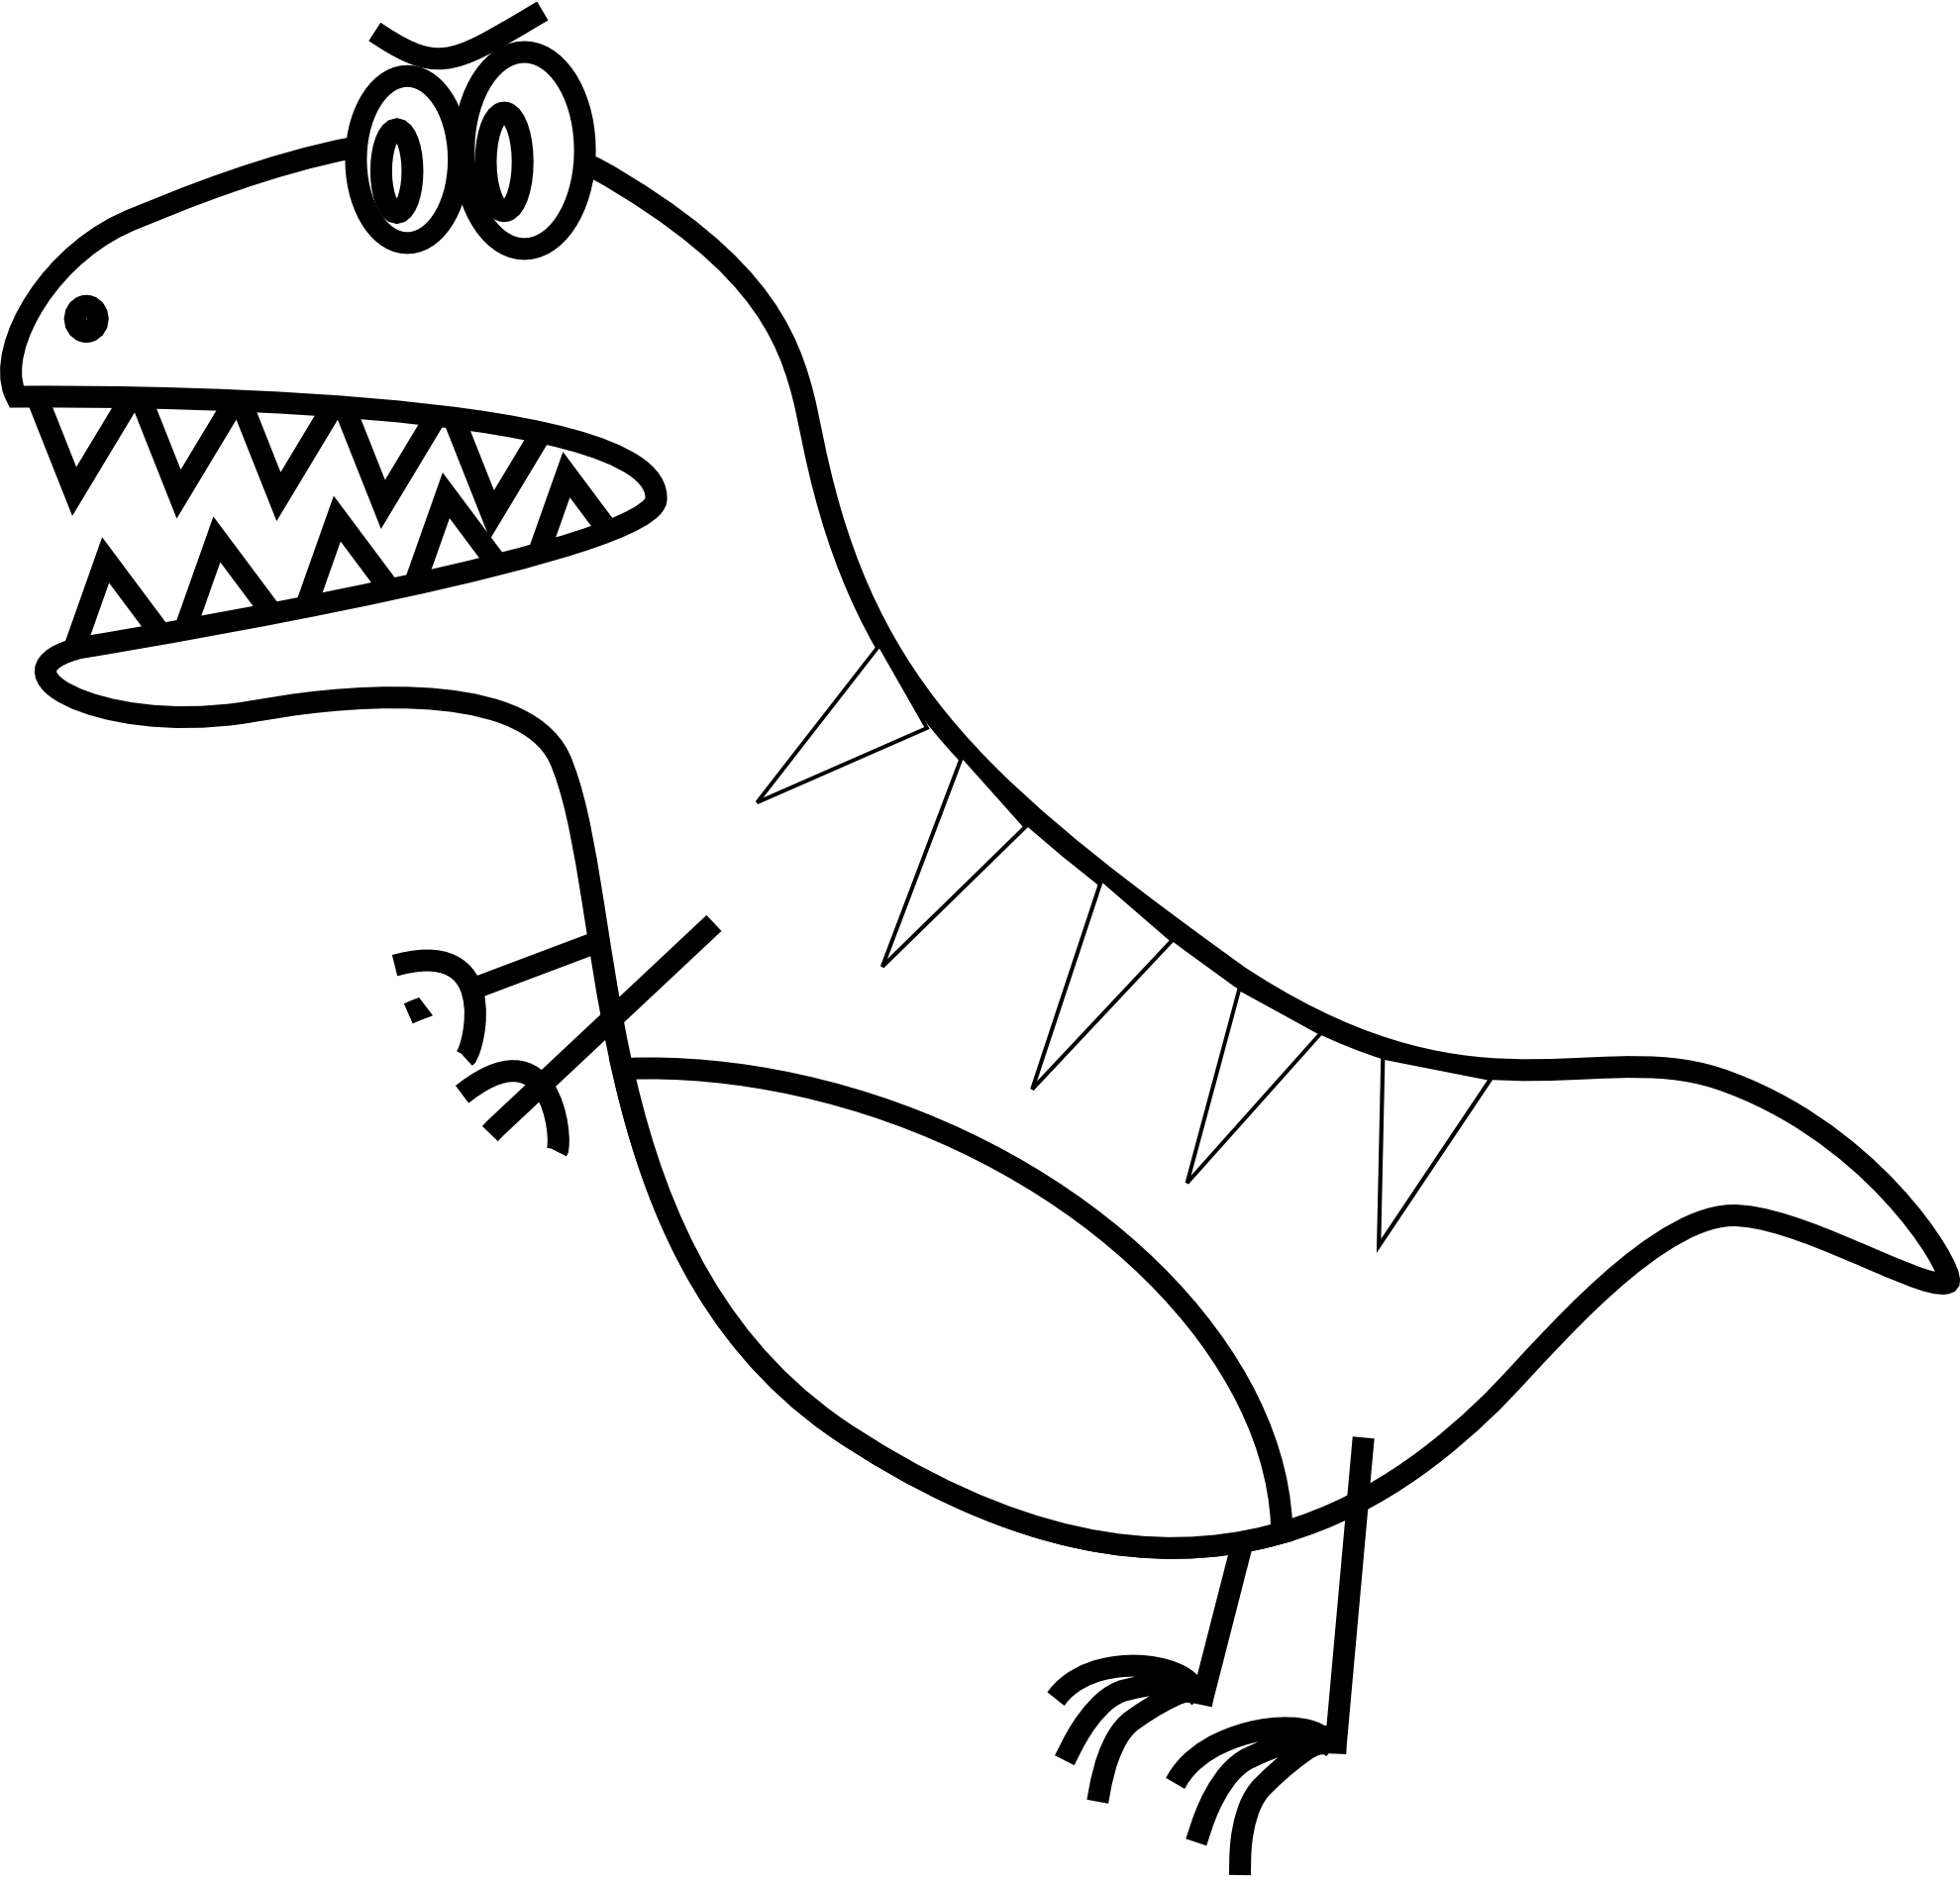 Dinosaur Clip Art Black And White Images & Pictures - Becuo